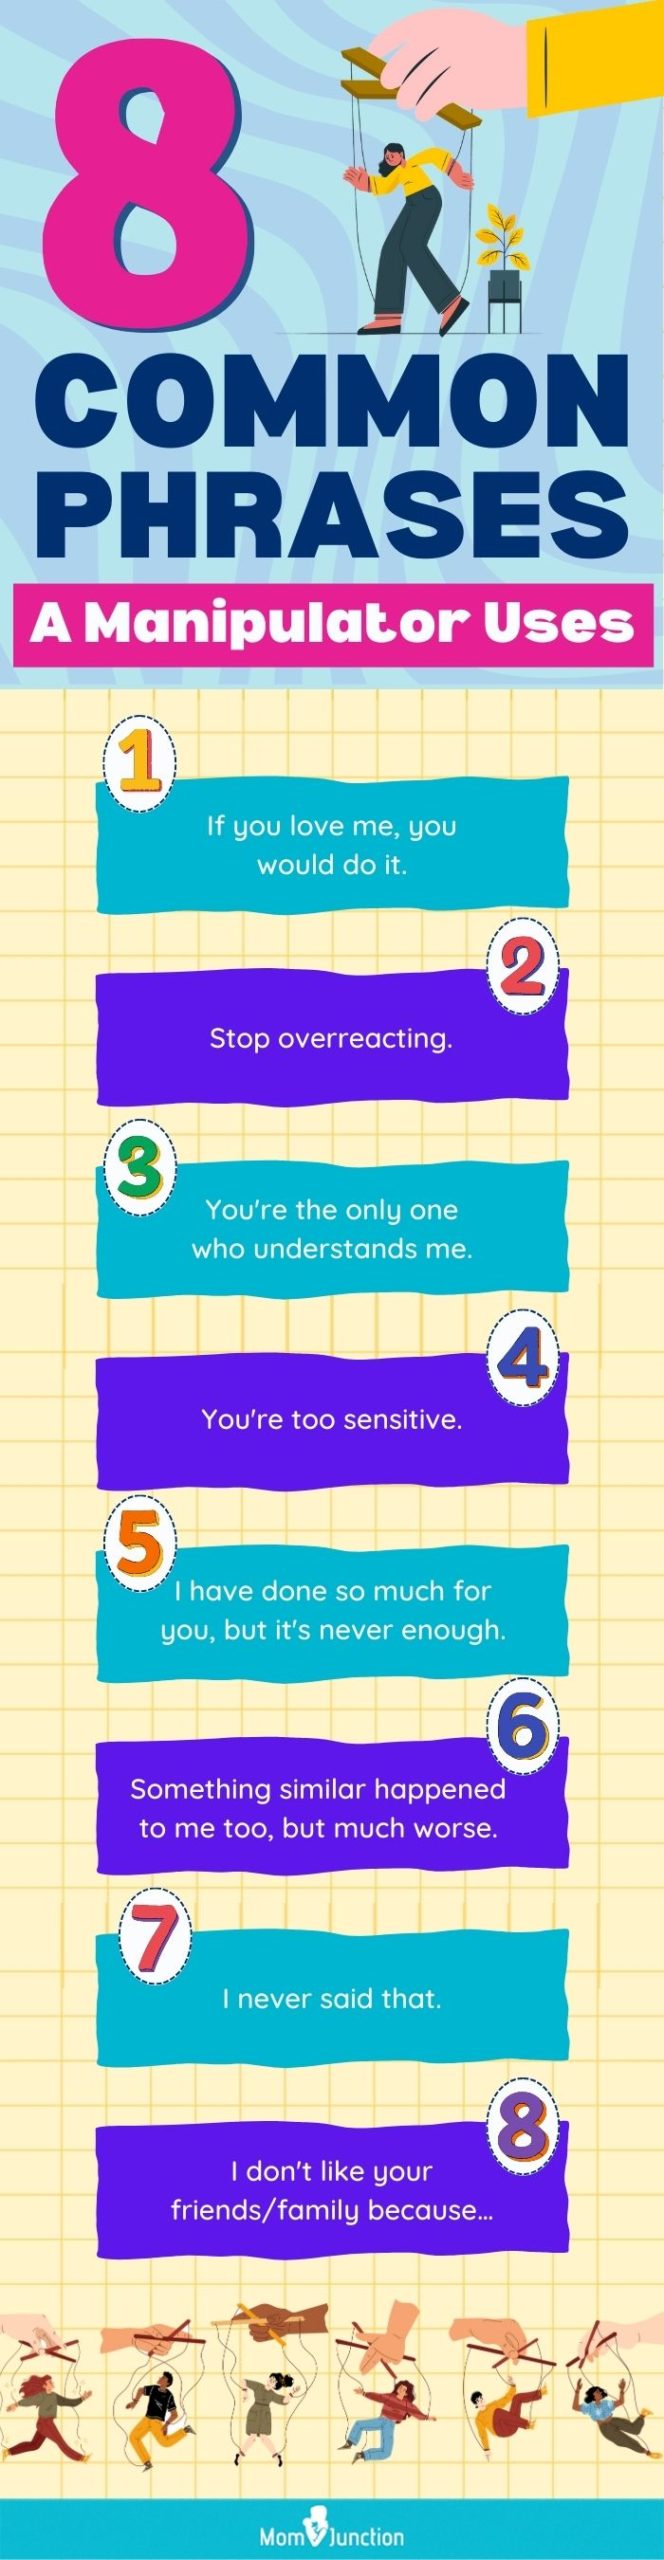 8 common phrases a manipulator uses (infographic)